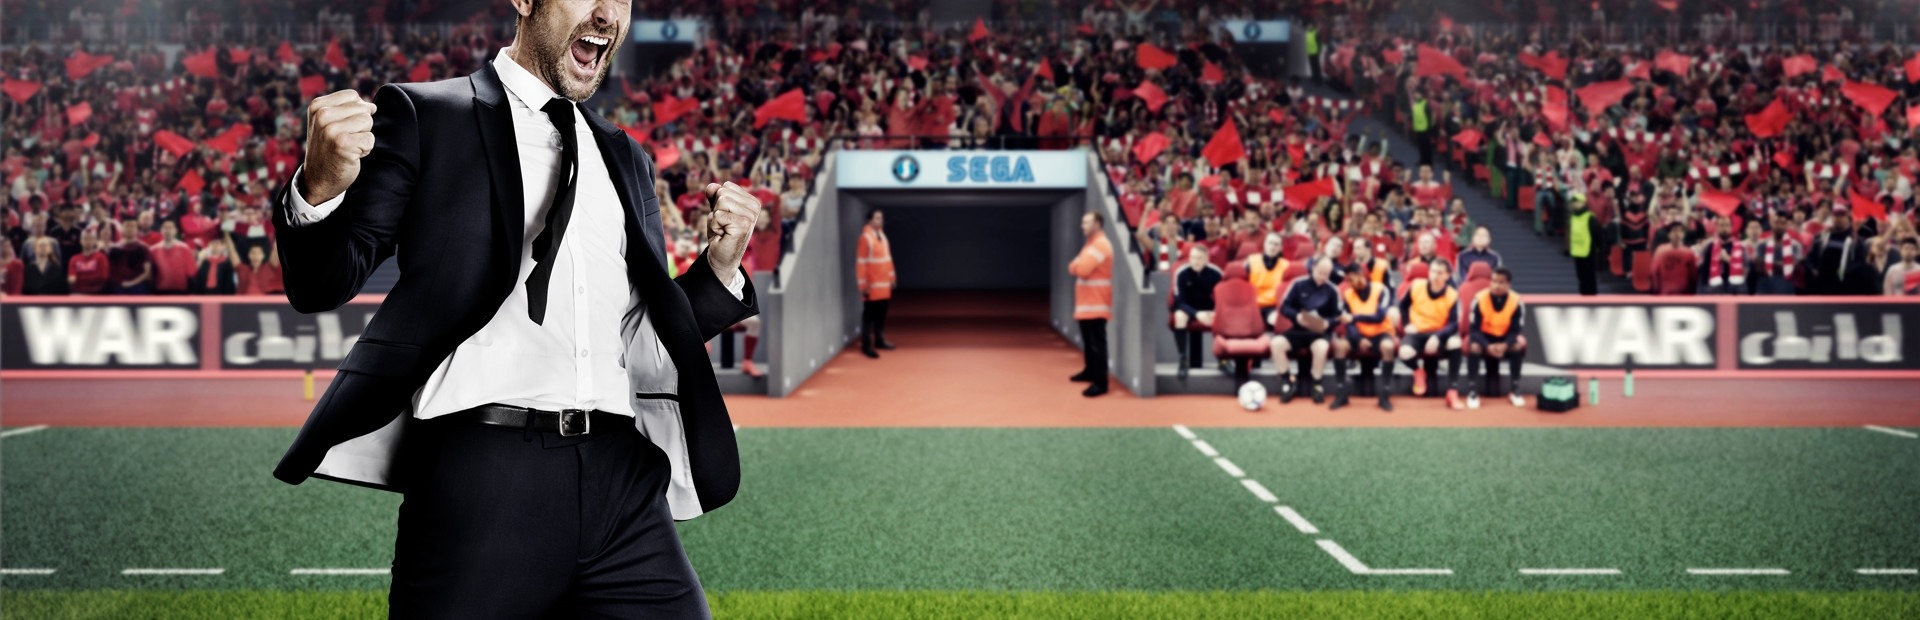 Banner Football Manager 2018